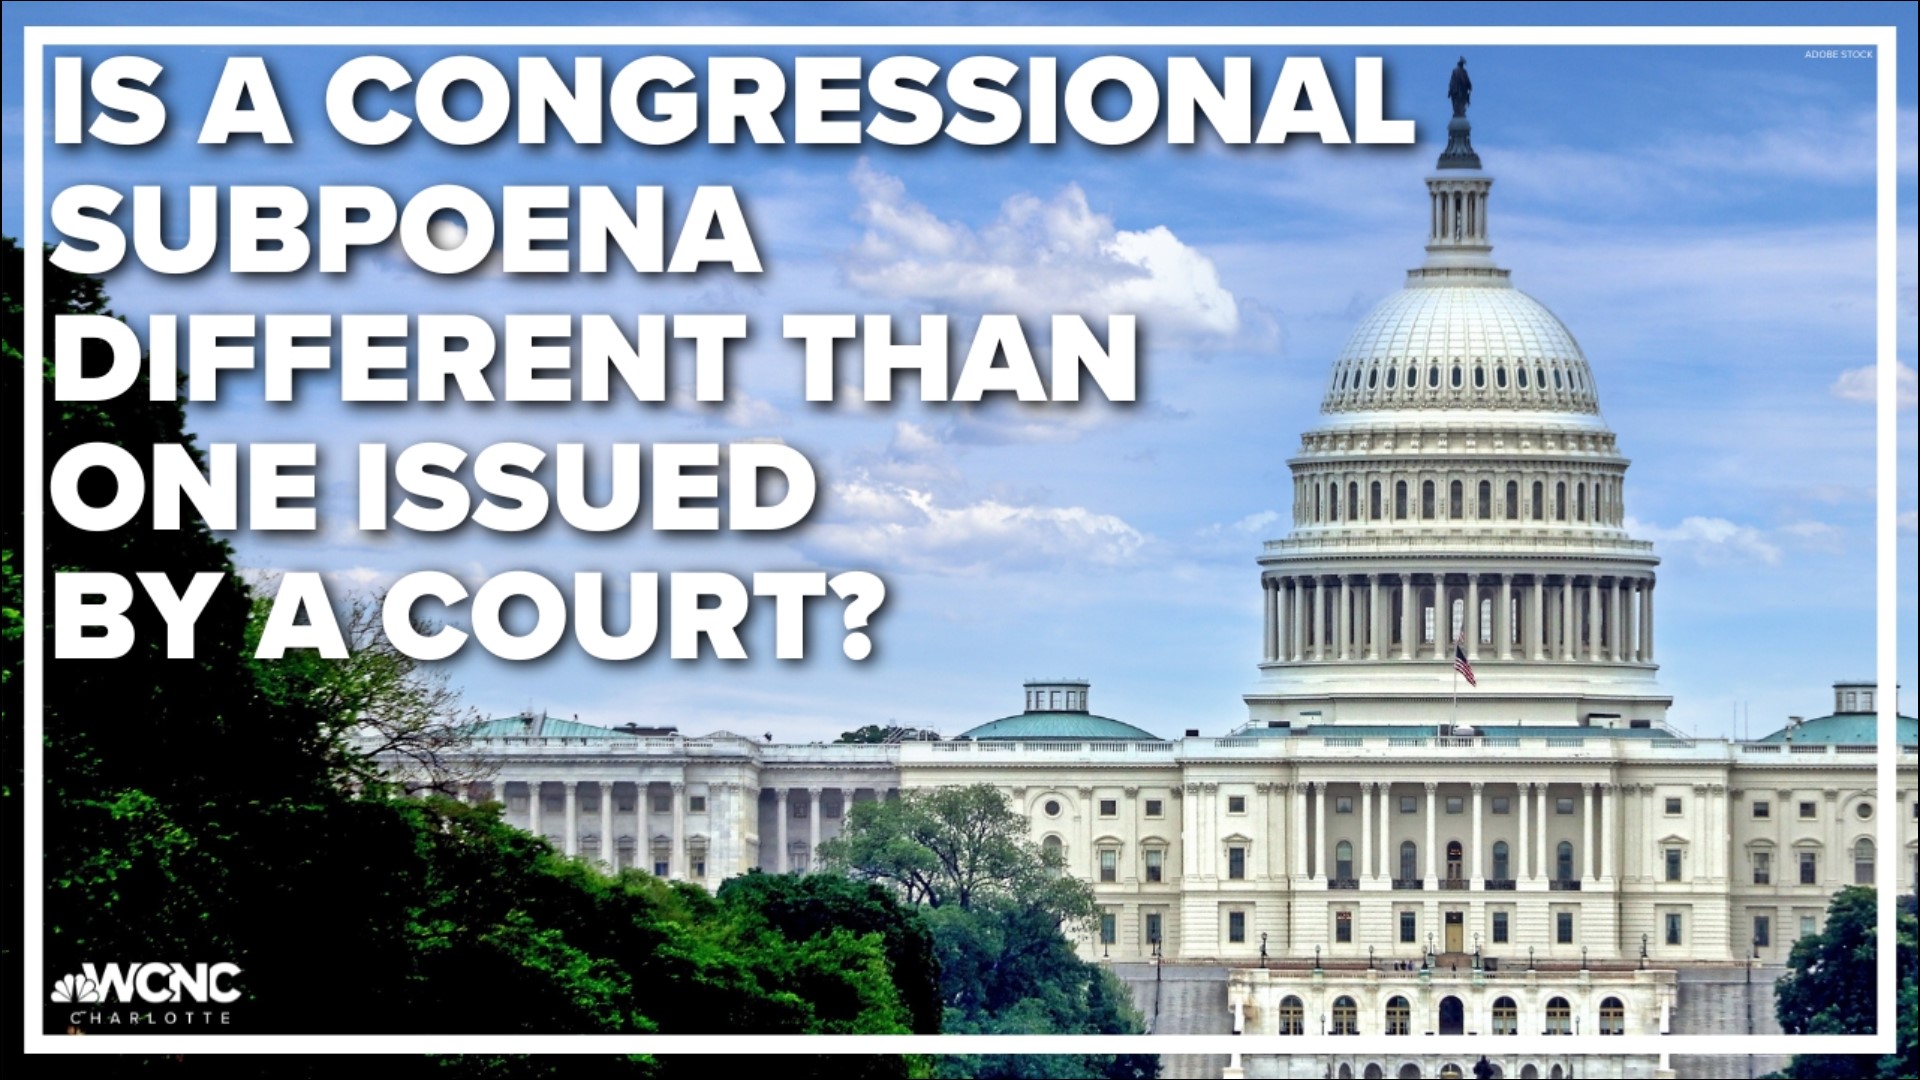 Is a congressional subpoena different than one issued by a court